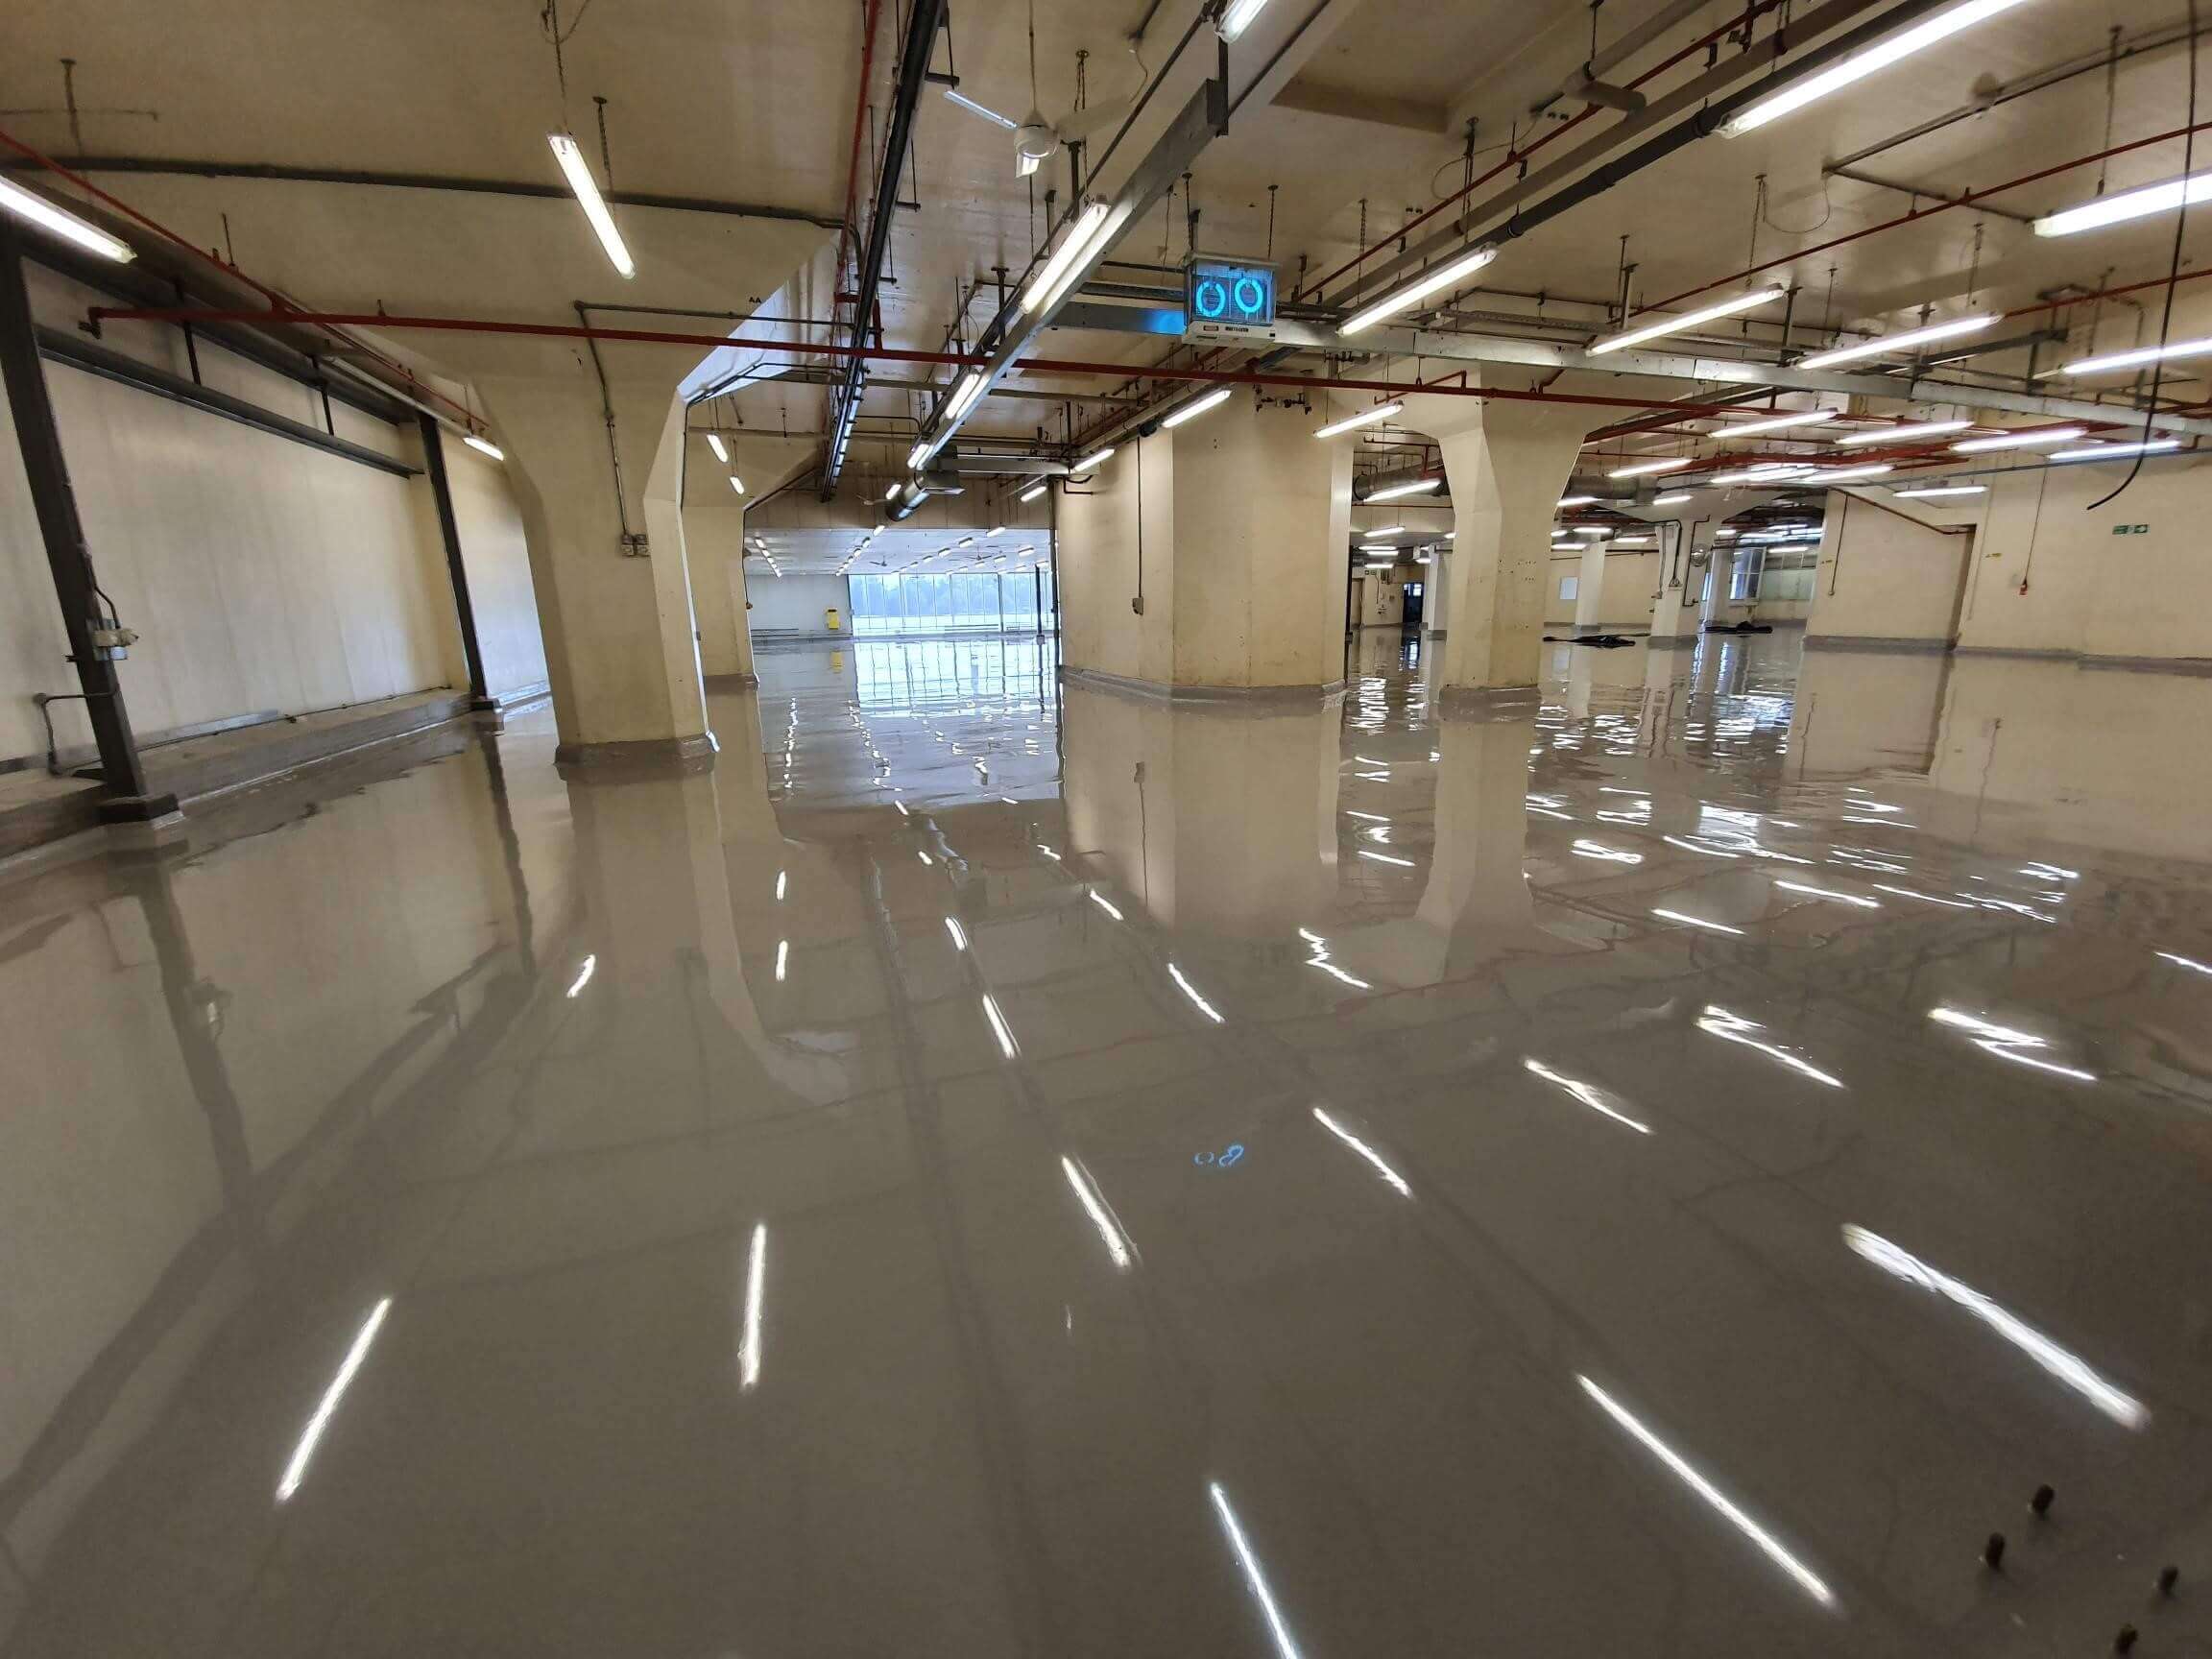 Completed epoxy resin floor at the Boots Factory in Nottingham